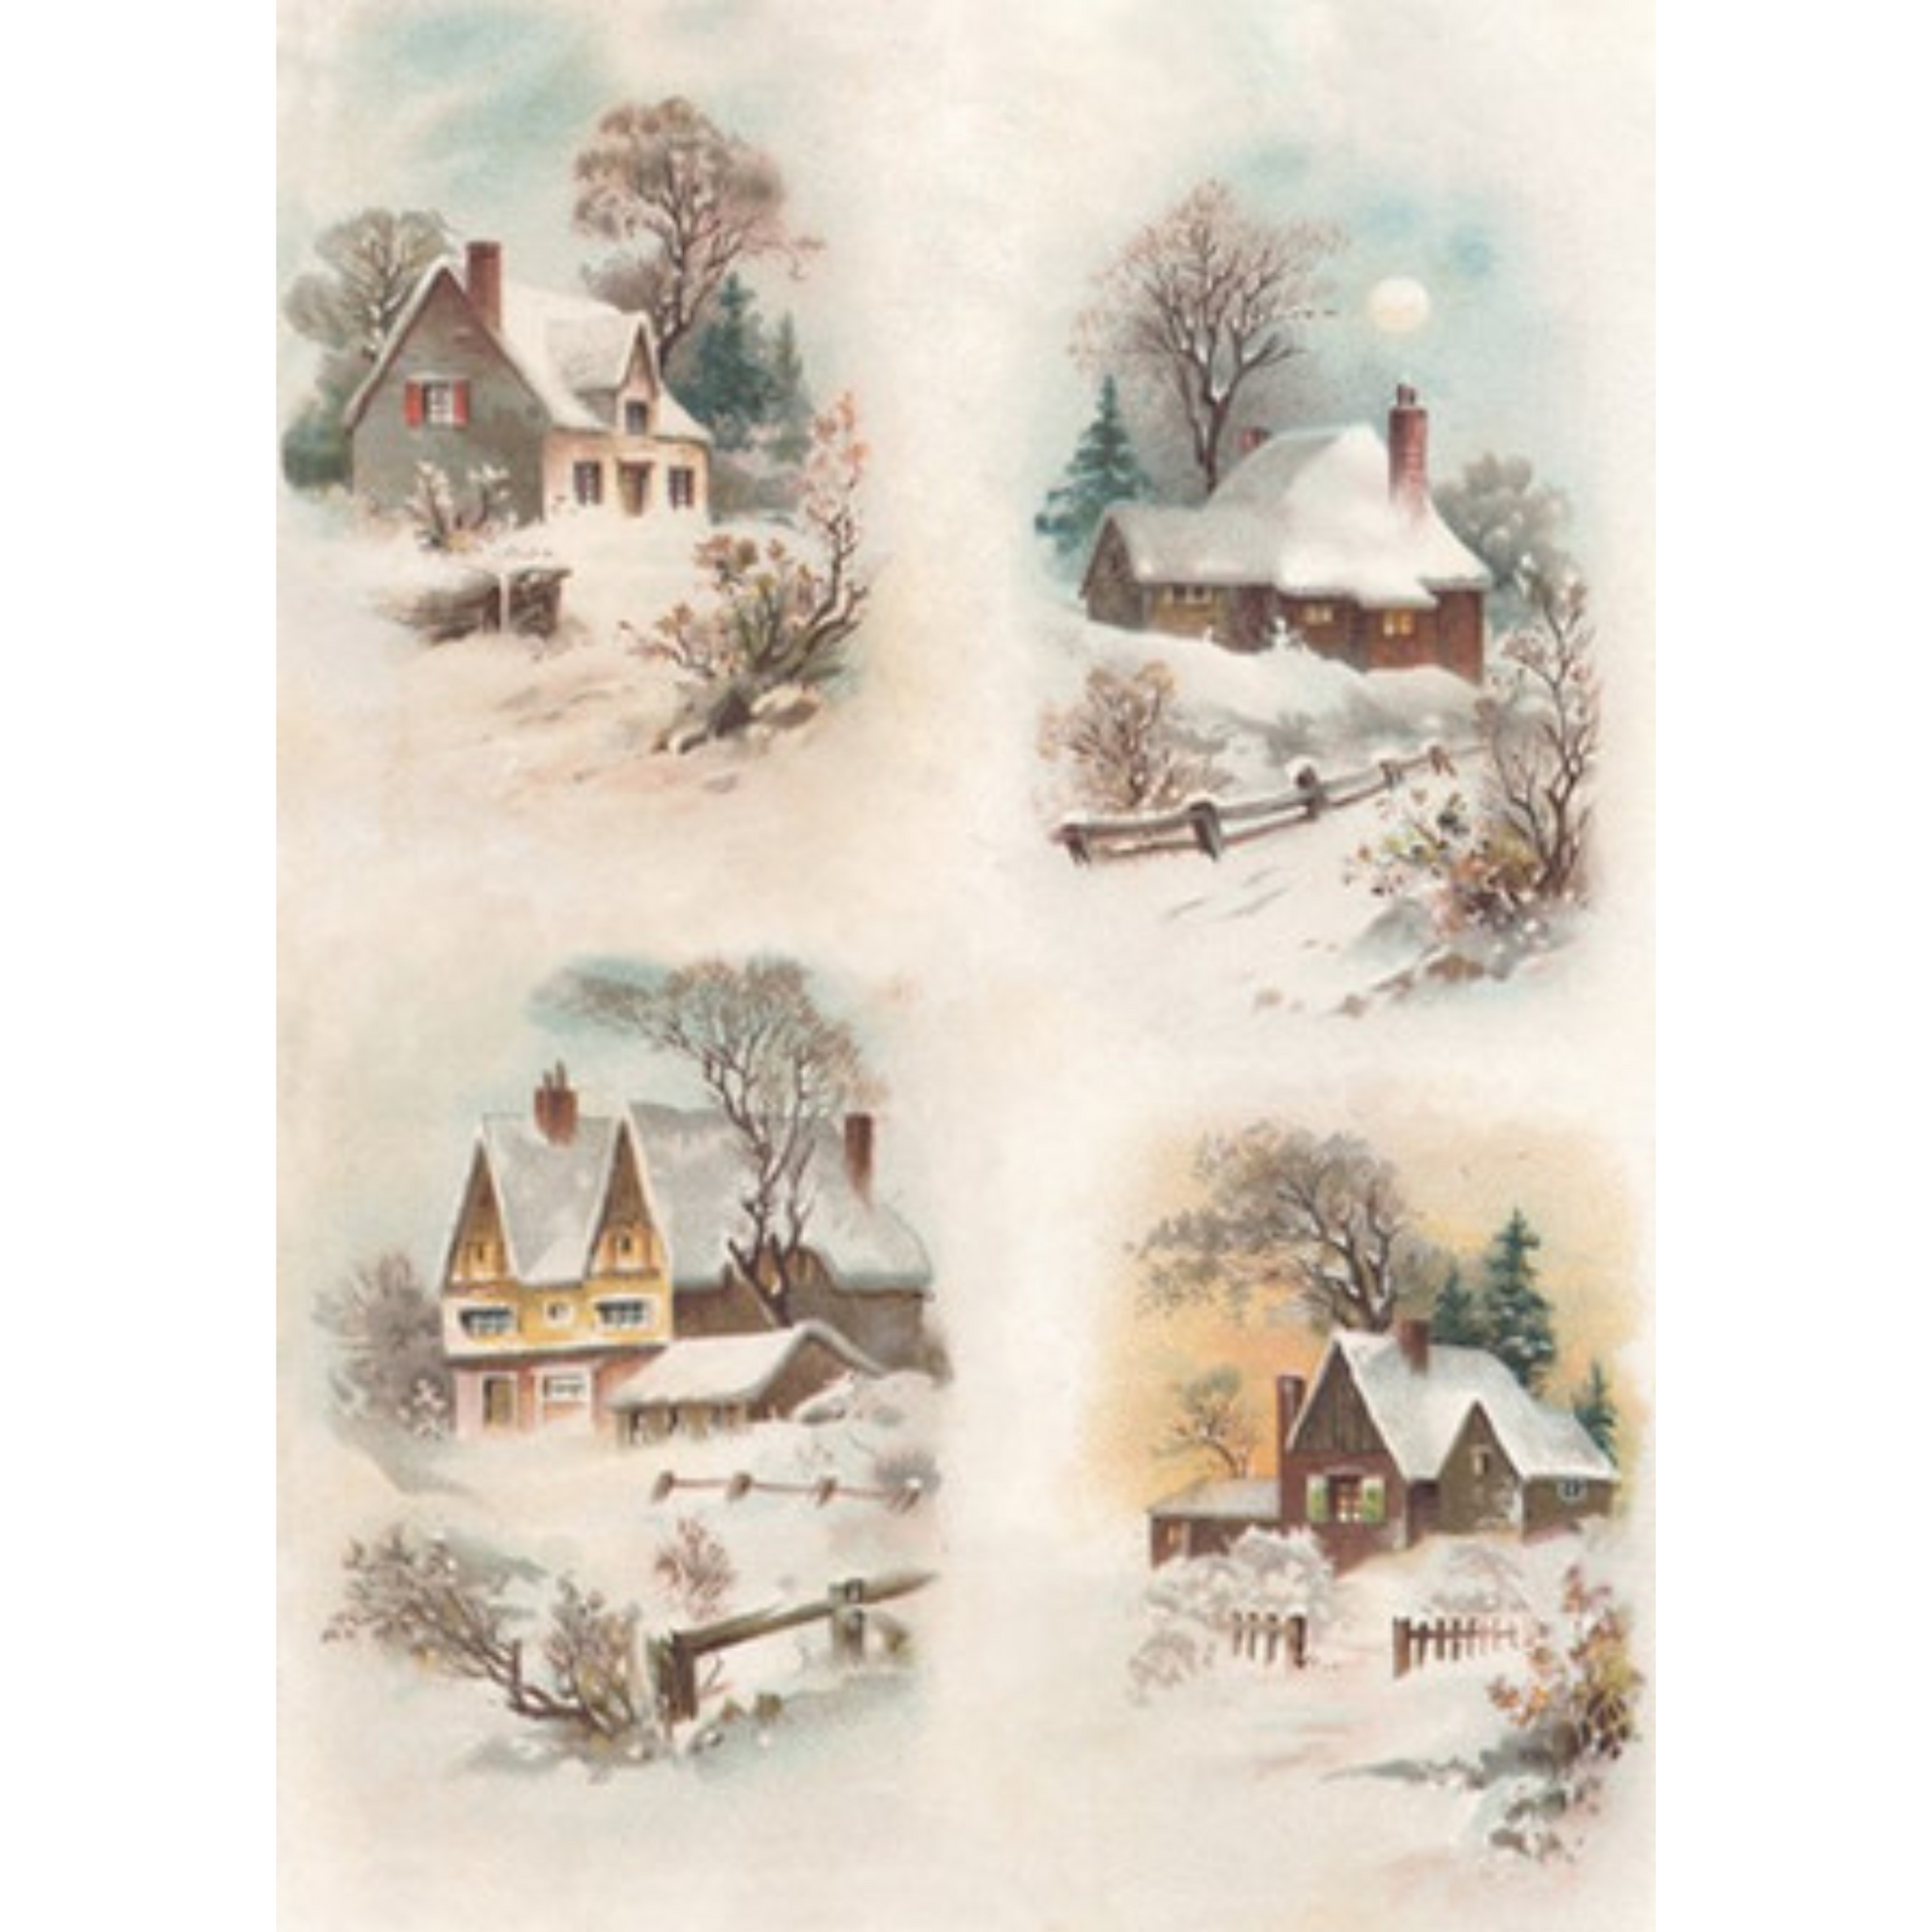 "4-Pack Snow Covered Houses" decoupage rice paper by Calambour. Available at Milton's Daughter.